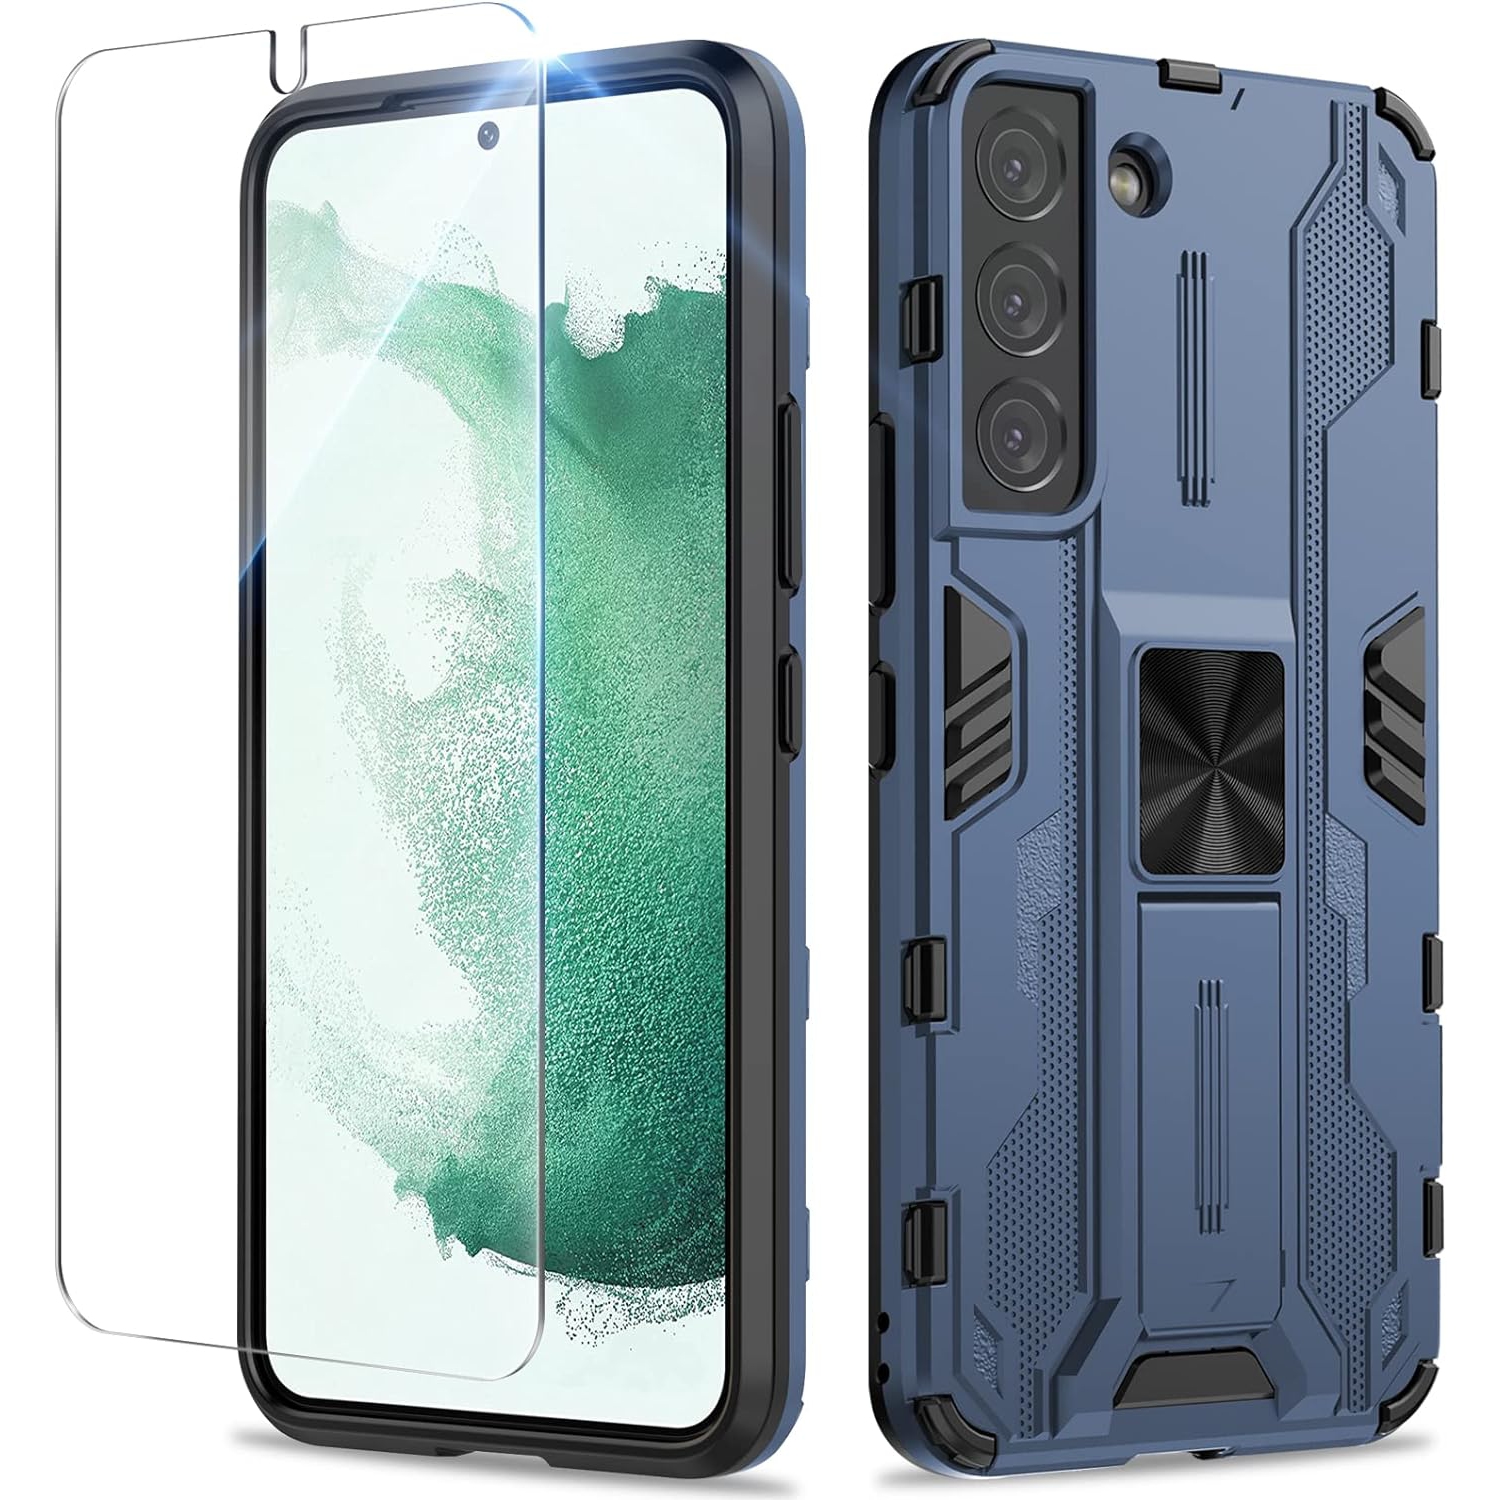 Case for Samsung Galaxy S22 with Screen Protector Tempered Glass, Heavy Duty Shockproof Tough Armour Case